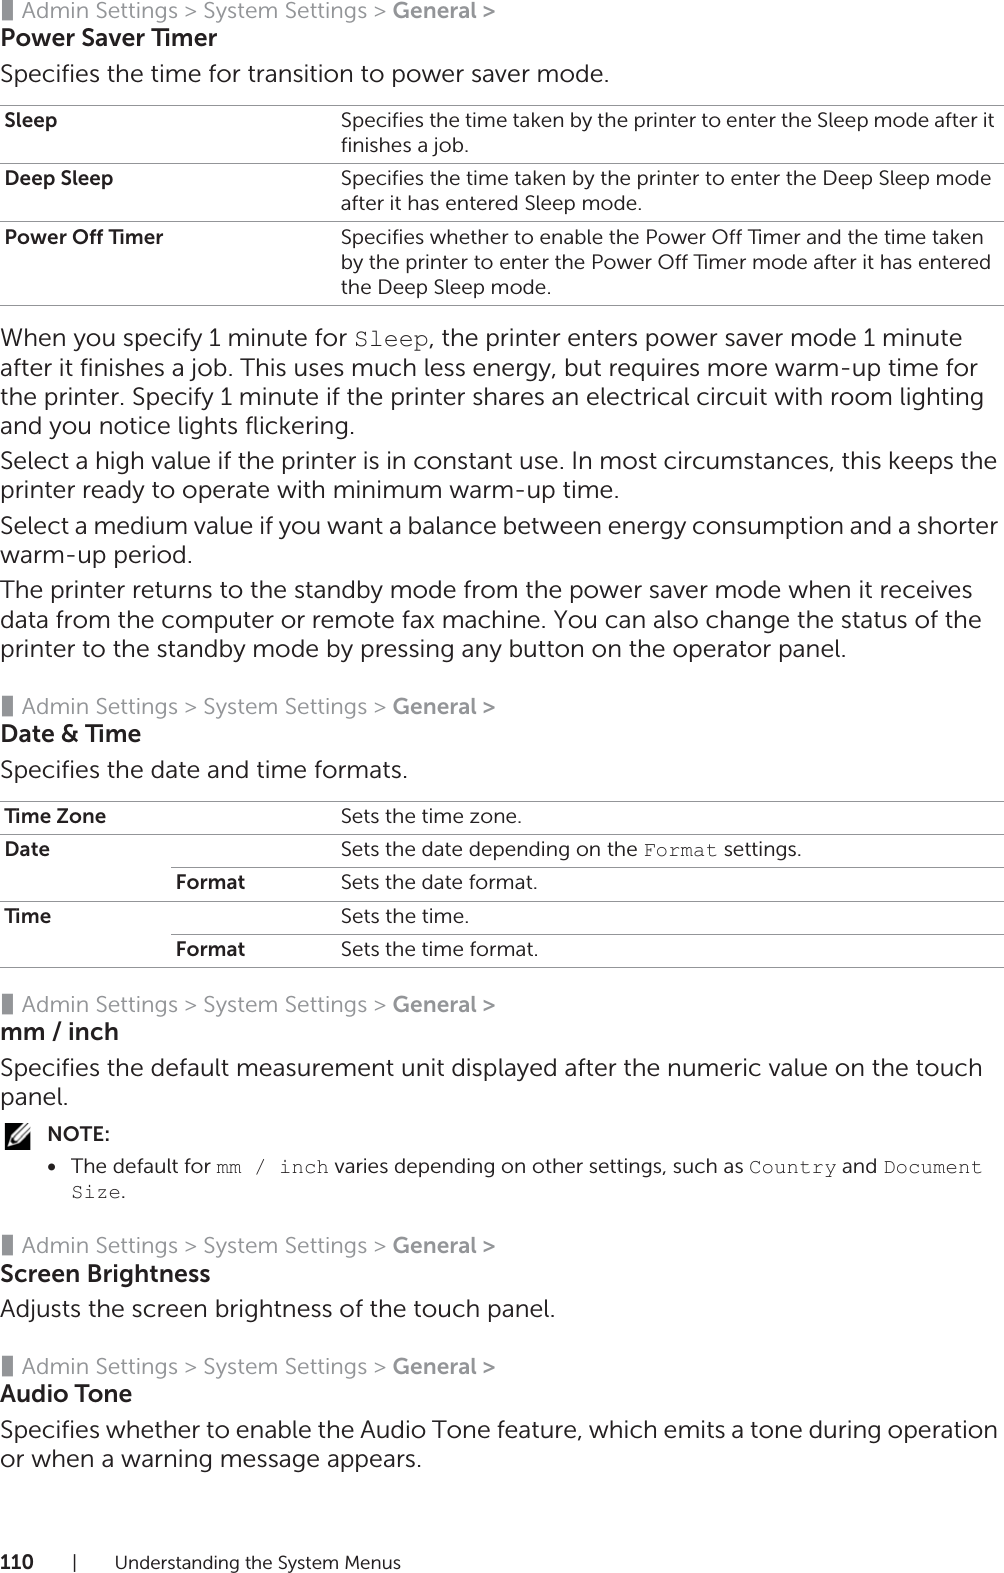 110| Understanding the System Menus❚Admin Settings &gt; System Settings &gt; General &gt;Power Saver TimerSpecifies the time for transition to power saver mode.When you specify 1 minute for Sleep, the printer enters power saver mode 1 minute after it finishes a job. This uses much less energy, but requires more warm-up time for the printer. Specify 1 minute if the printer shares an electrical circuit with room lighting and you notice lights flickering.Select a high value if the printer is in constant use. In most circumstances, this keeps the printer ready to operate with minimum warm-up time.Select a medium value if you want a balance between energy consumption and a shorter warm-up period.The printer returns to the standby mode from the power saver mode when it receives data from the computer or remote fax machine. You can also change the status of the printer to the standby mode by pressing any button on the operator panel.❚Admin Settings &gt; System Settings &gt; General &gt;Date &amp; TimeSpecifies the date and time formats.❚Admin Settings &gt; System Settings &gt; General &gt;mm / inchSpecifies the default measurement unit displayed after the numeric value on the touch panel.NOTE:•The default for mm / inch varies depending on other settings, such as Country and Document Size.❚Admin Settings &gt; System Settings &gt; General &gt;Screen BrightnessAdjusts the screen brightness of the touch panel.❚Admin Settings &gt; System Settings &gt; General &gt;Audio ToneSpecifies whether to enable the Audio Tone feature, which emits a tone during operation or when a warning message appears.Sleep Specifies the time taken by the printer to enter the Sleep mode after it finishes a job.Deep Sleep Specifies the time taken by the printer to enter the Deep Sleep mode after it has entered Sleep mode.Power Off Timer Specifies whether to enable the Power Off Timer and the time taken by the printer to enter the Power Off Timer mode after it has entered the Deep Sleep mode.Time Zone Sets the time zone.Date Sets the date depending on the Format settings.Format Sets the date format.Time Sets the time.Format Sets the time format.